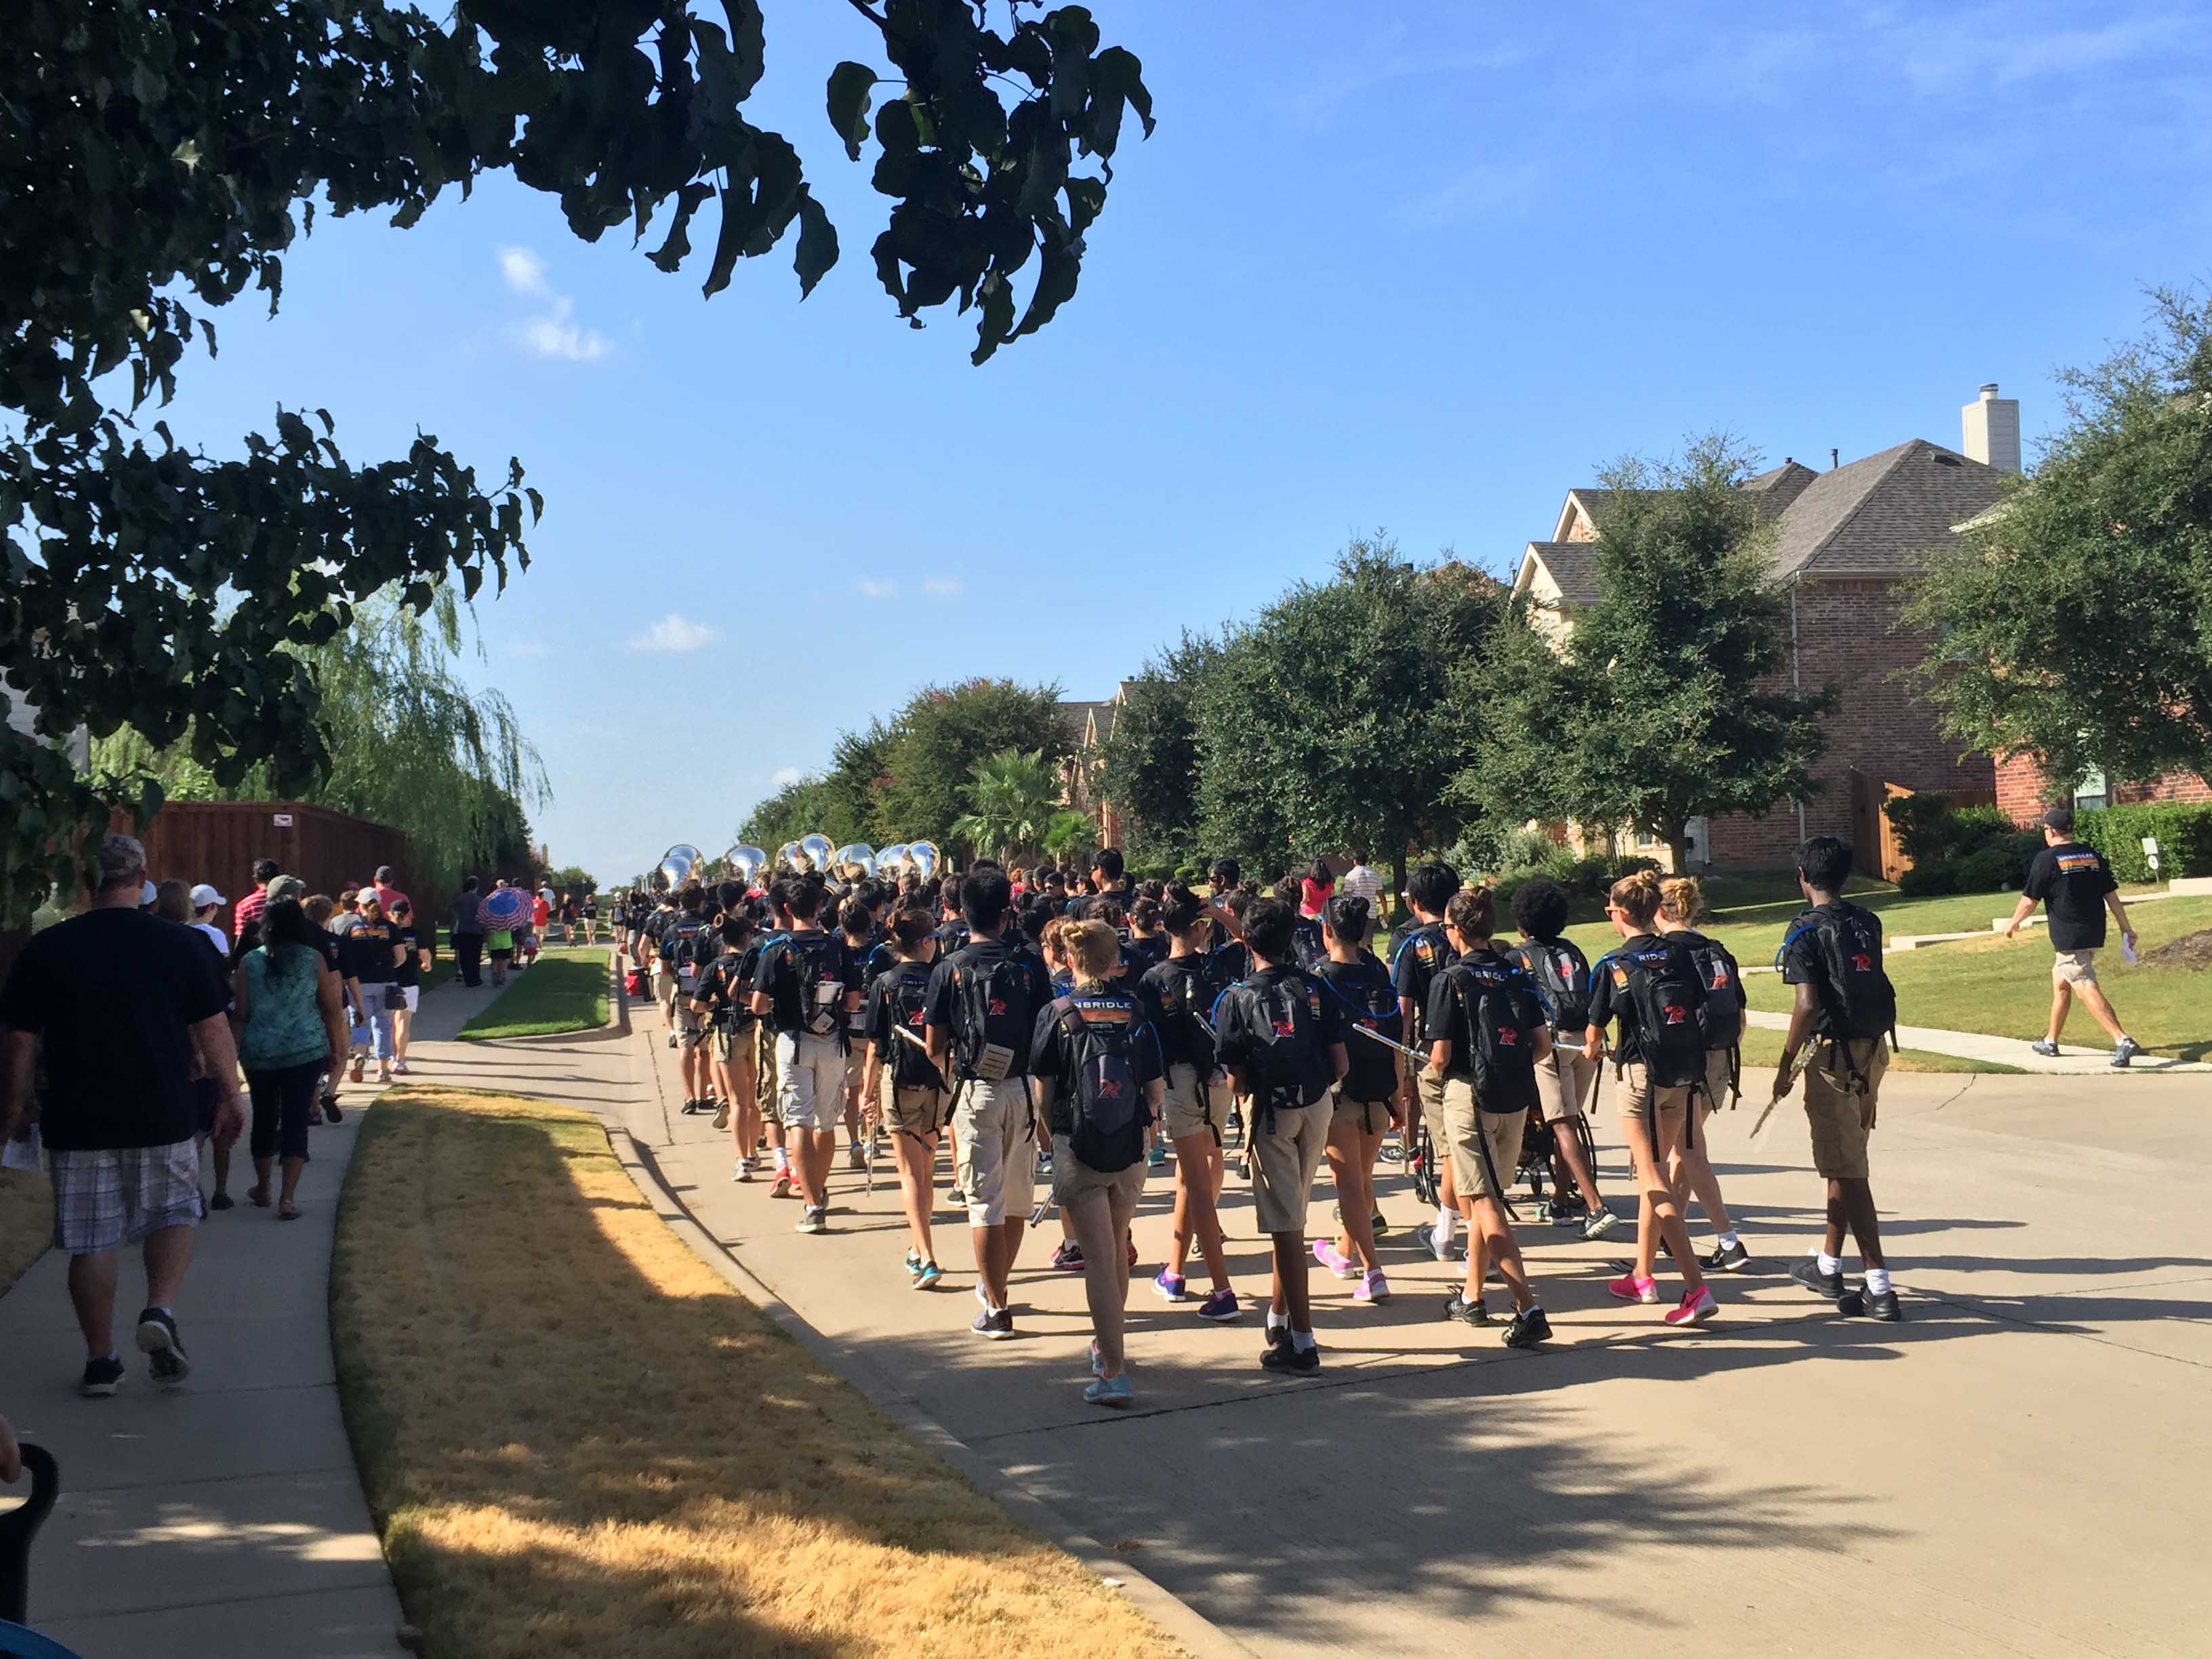 With supports walking along on the sidewalk, the band makes its way through the Turnbridge Manor and Hunters Creek neighborhoods as part of Saturday's March-a-thon.